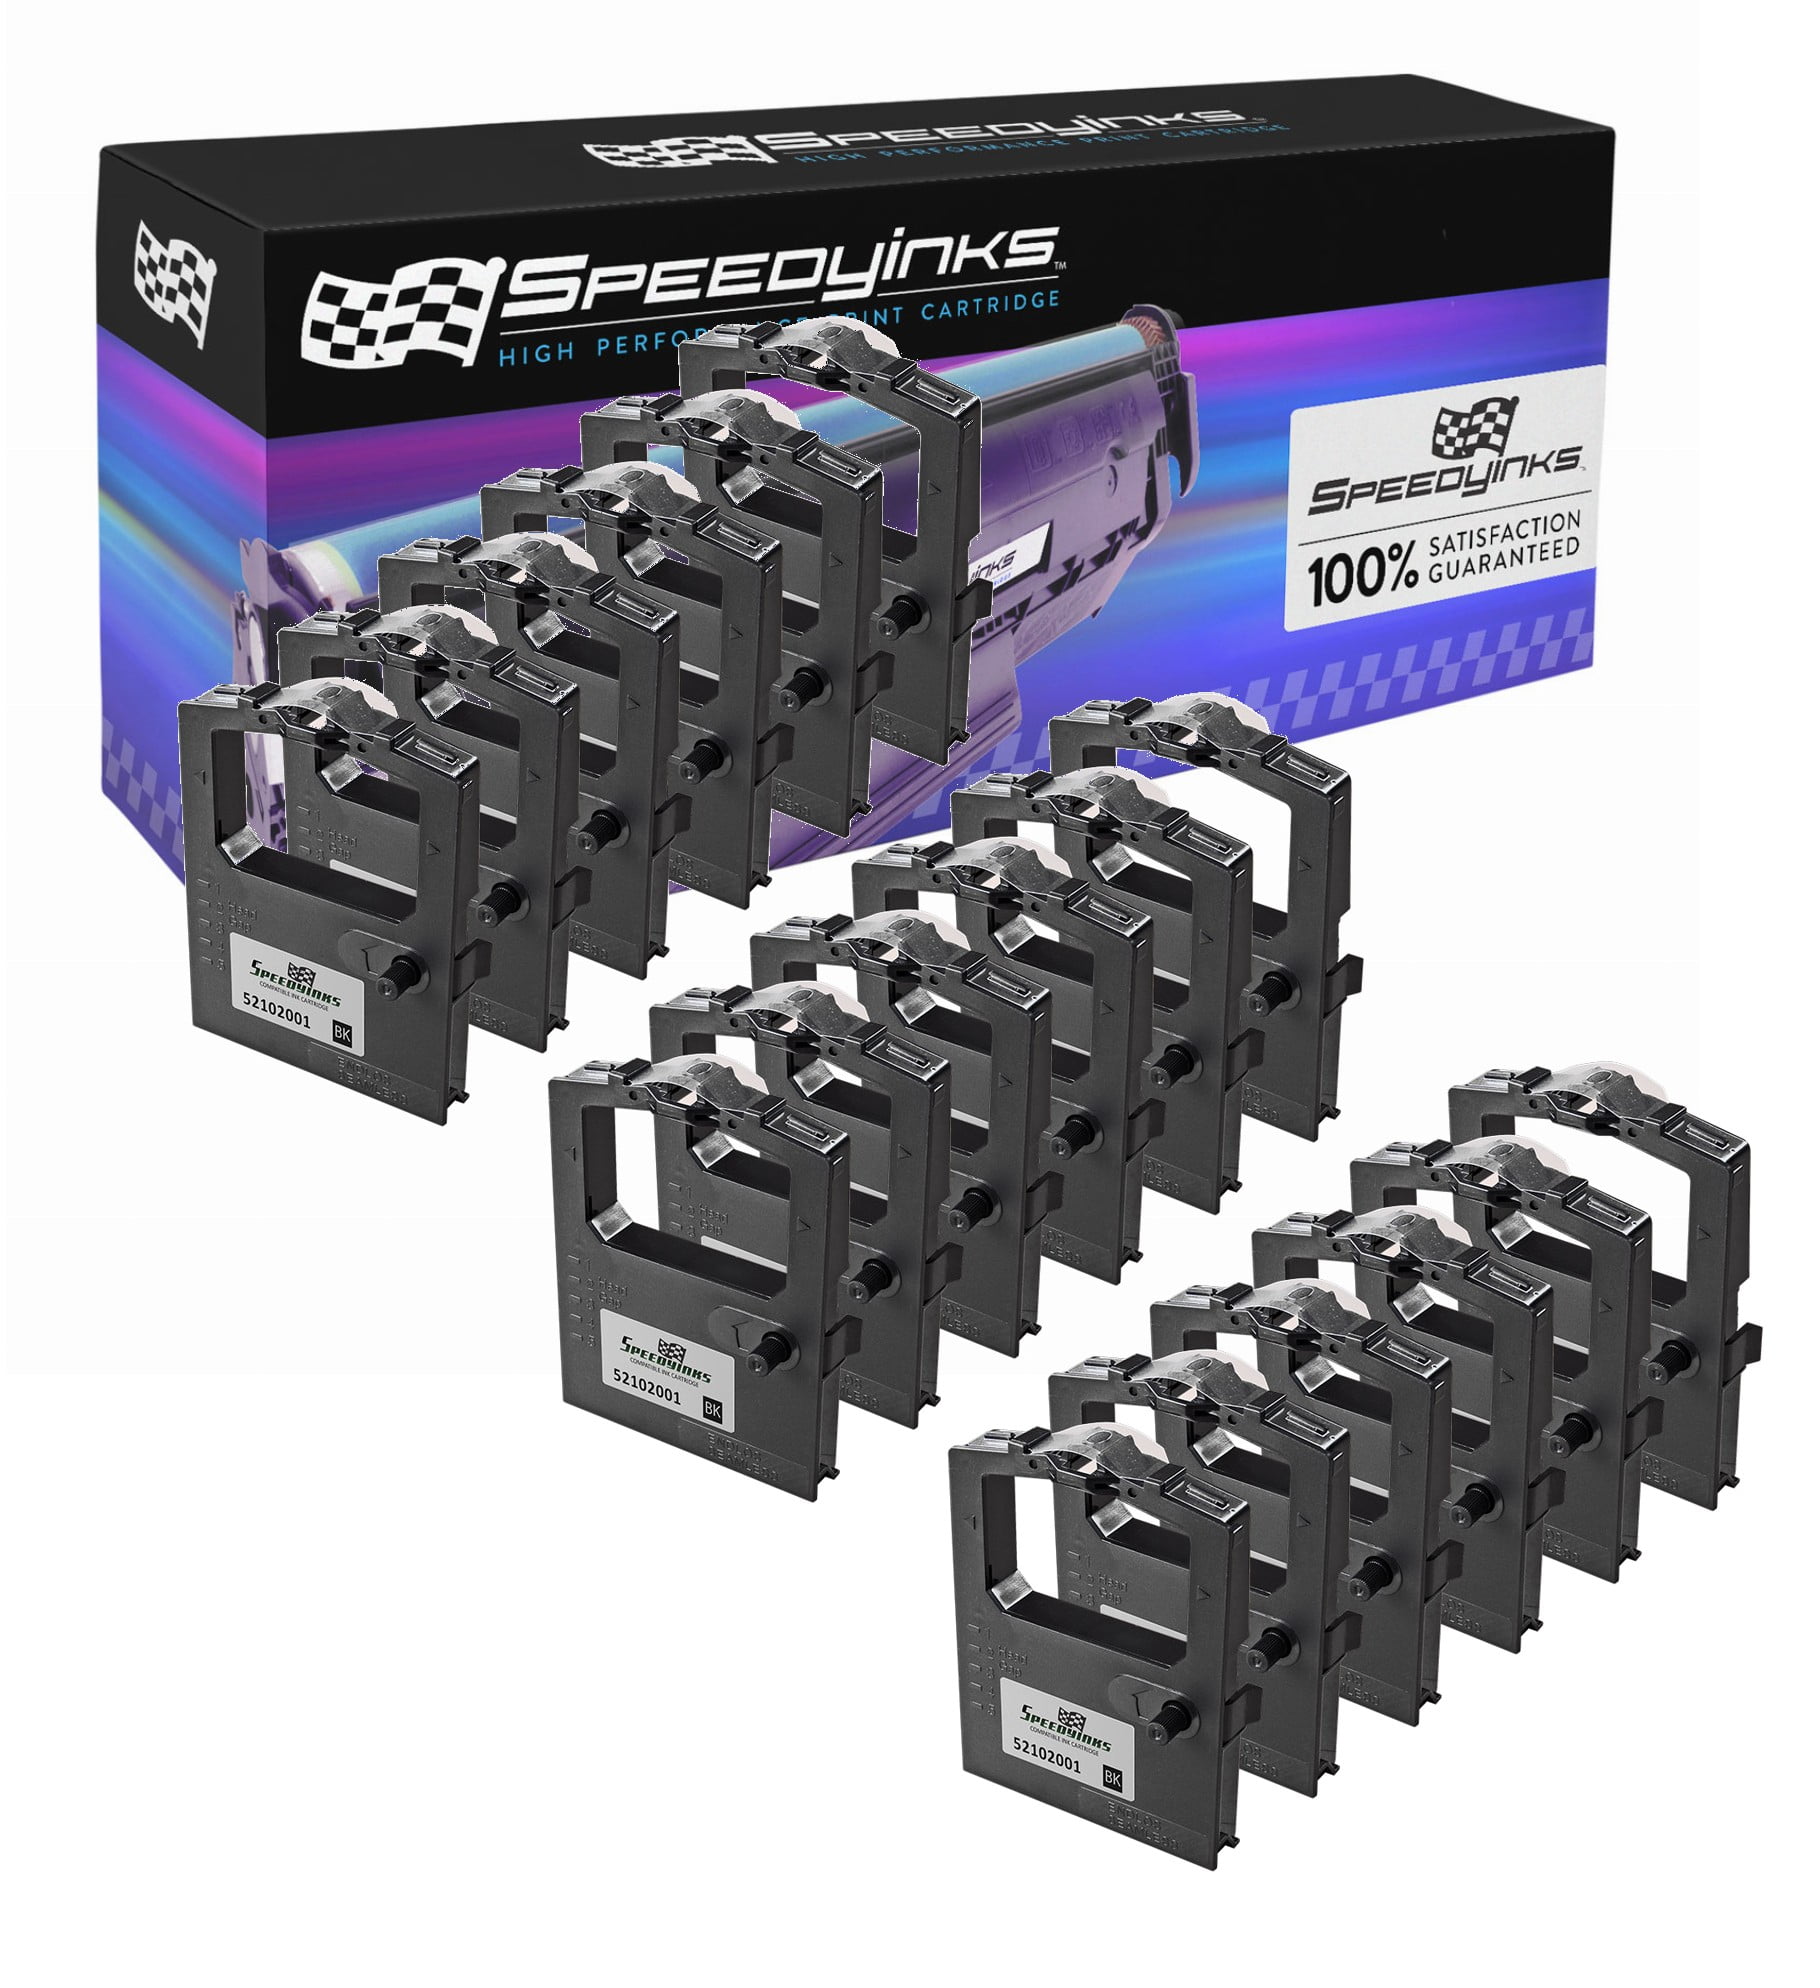 SPEEDYINKS Speedy Inks Compatible Printer Ribbon Cartridge Replacements for Okidata 52102001 Black, 8-Pack 